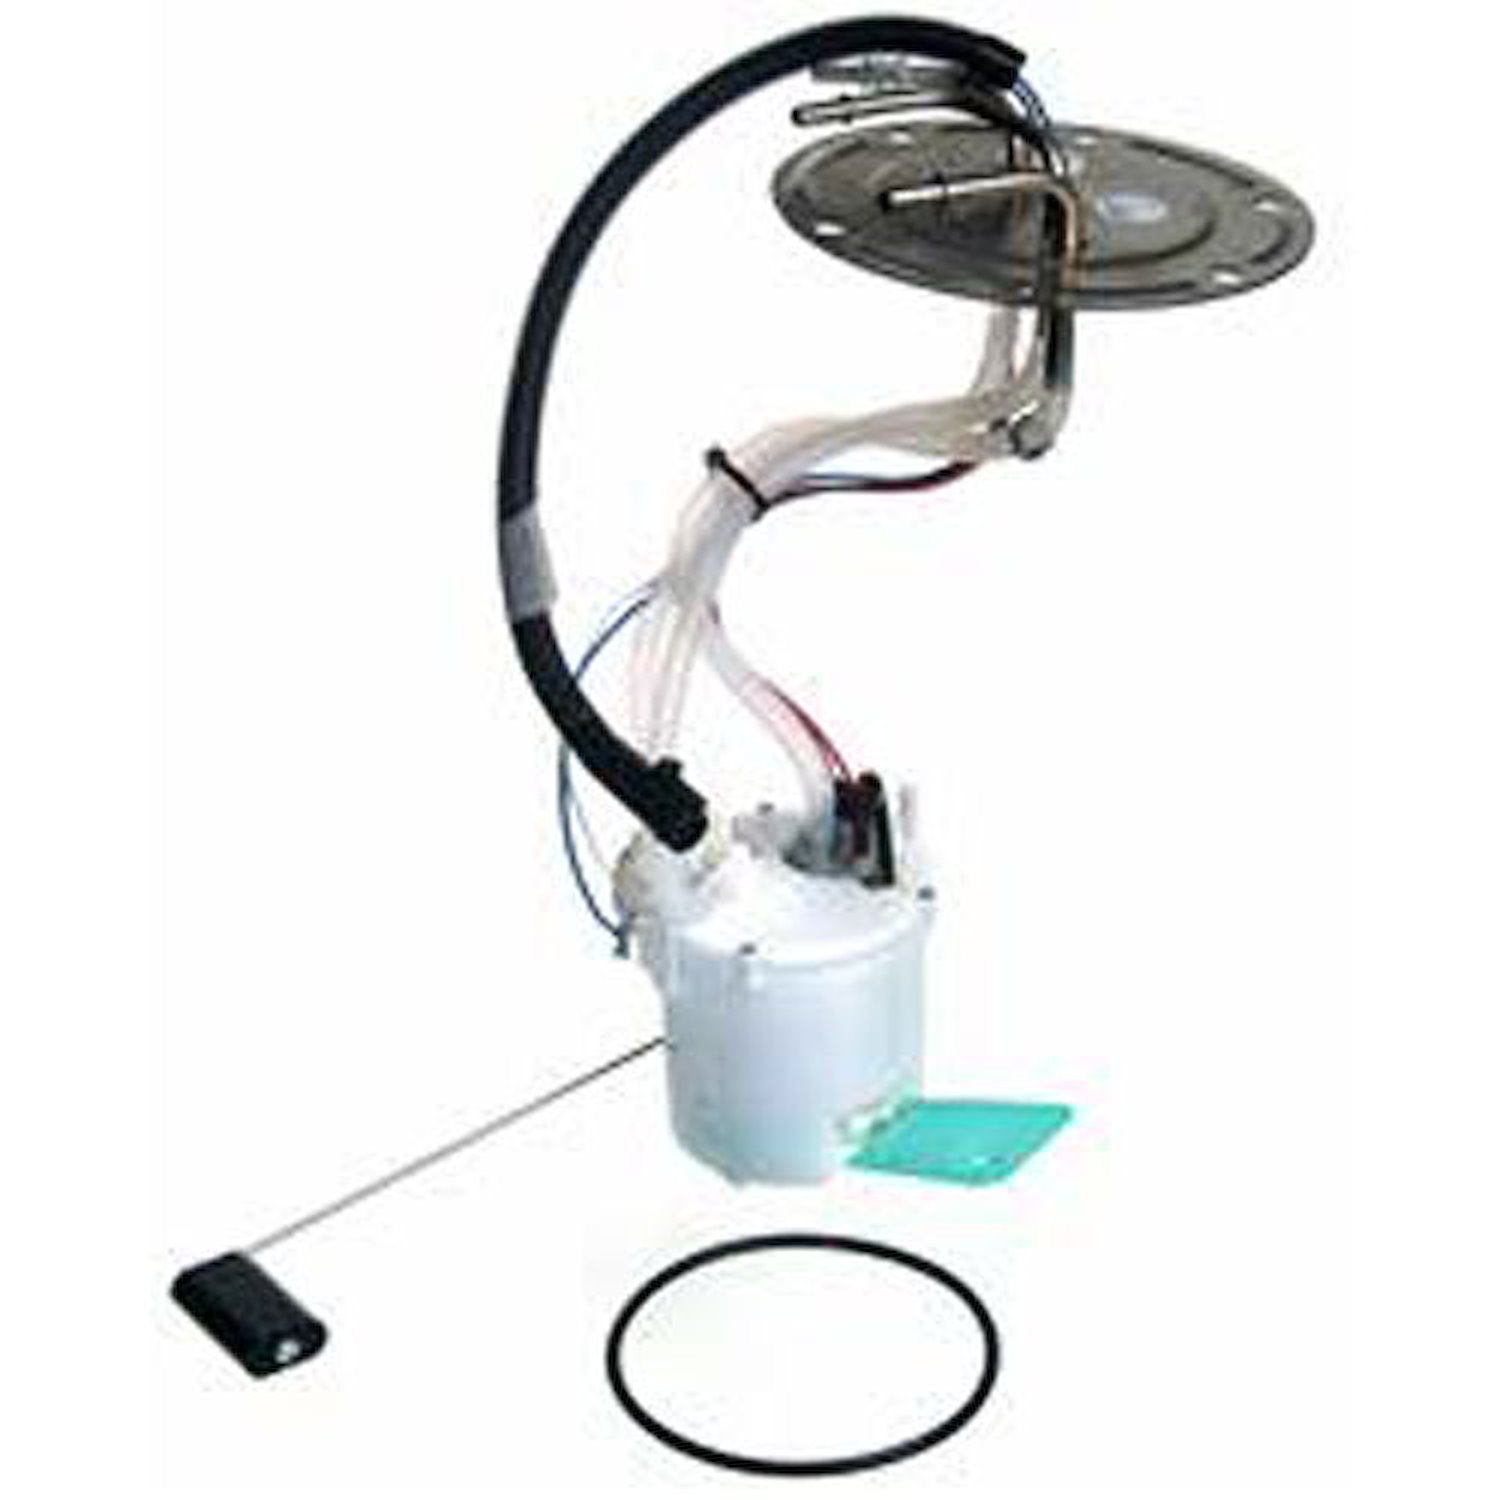 OE Ford Replacement Electric Fuel Pump Module Assembly 1999 Ford F250/F350/F450/F550 Super Duty 5.4L/6.8L V8